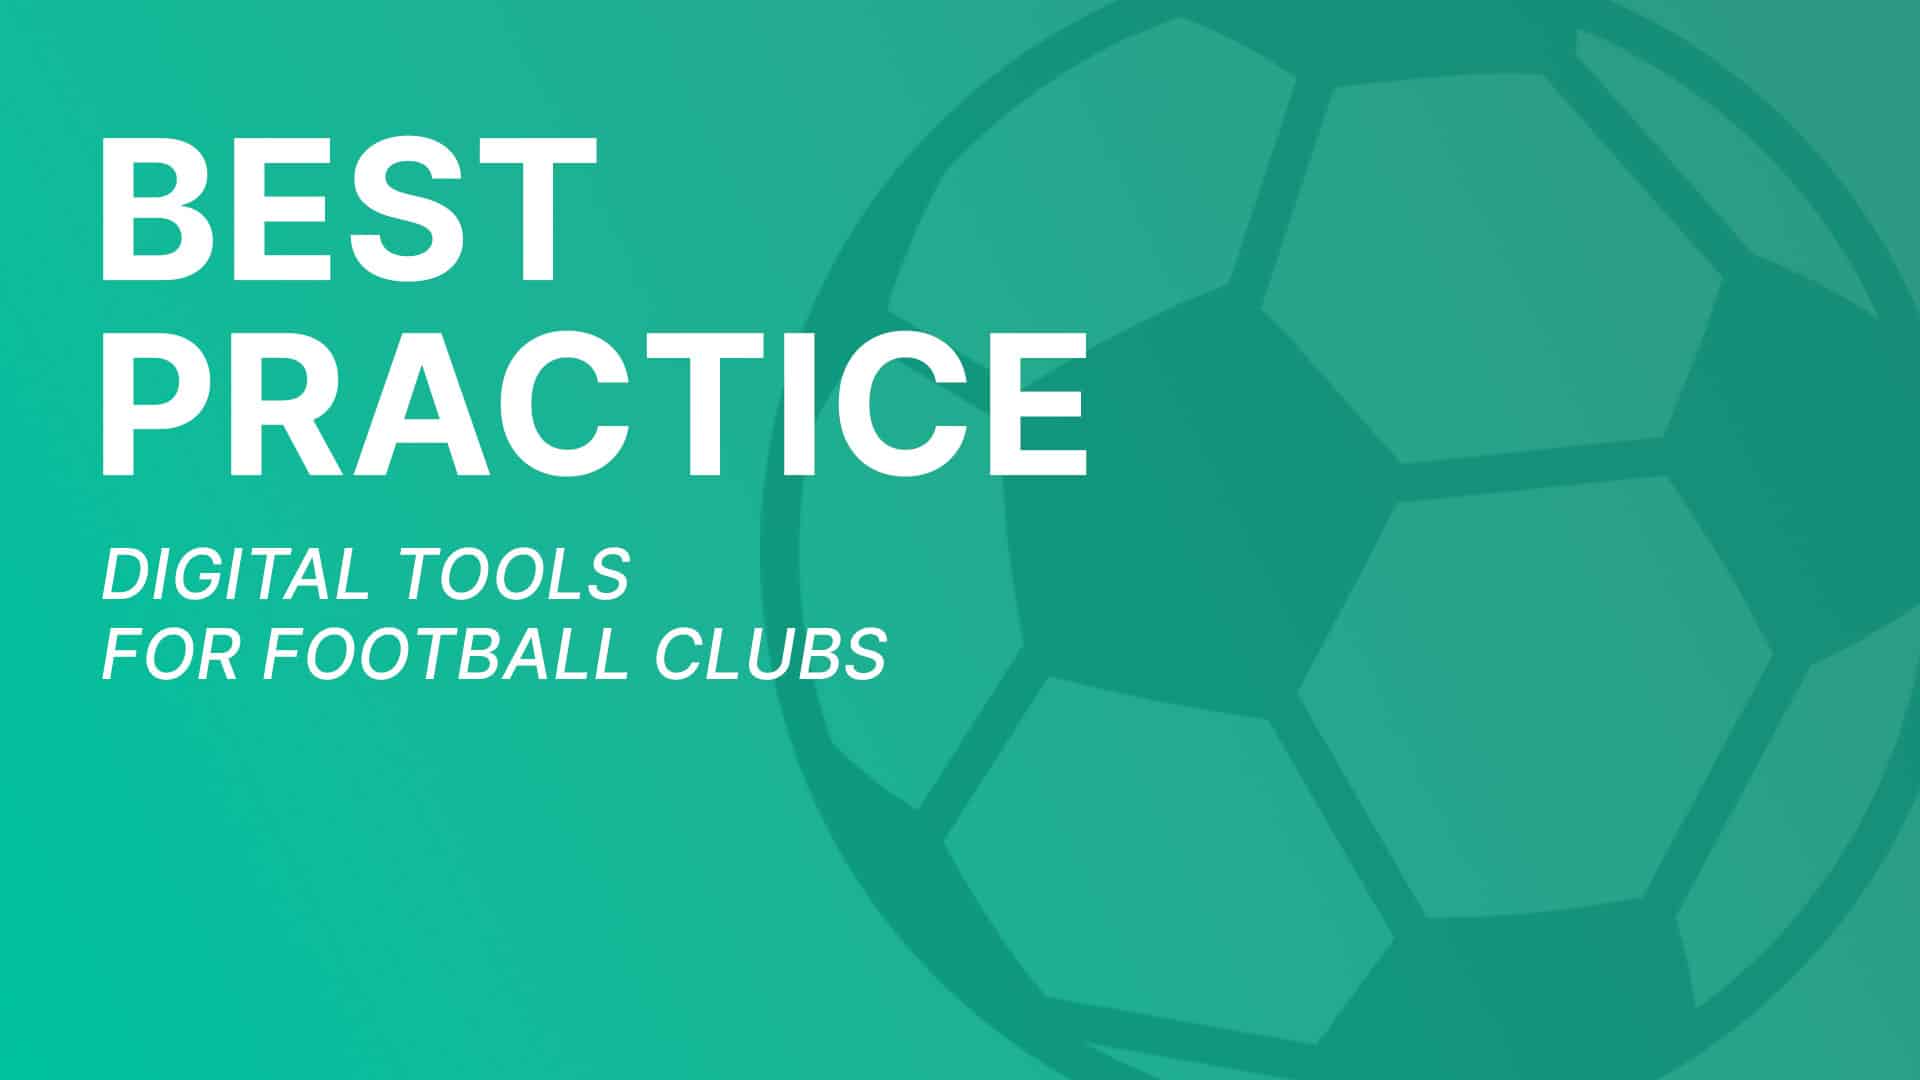 Image - Best Practice - Digital Tools for Football Clubs